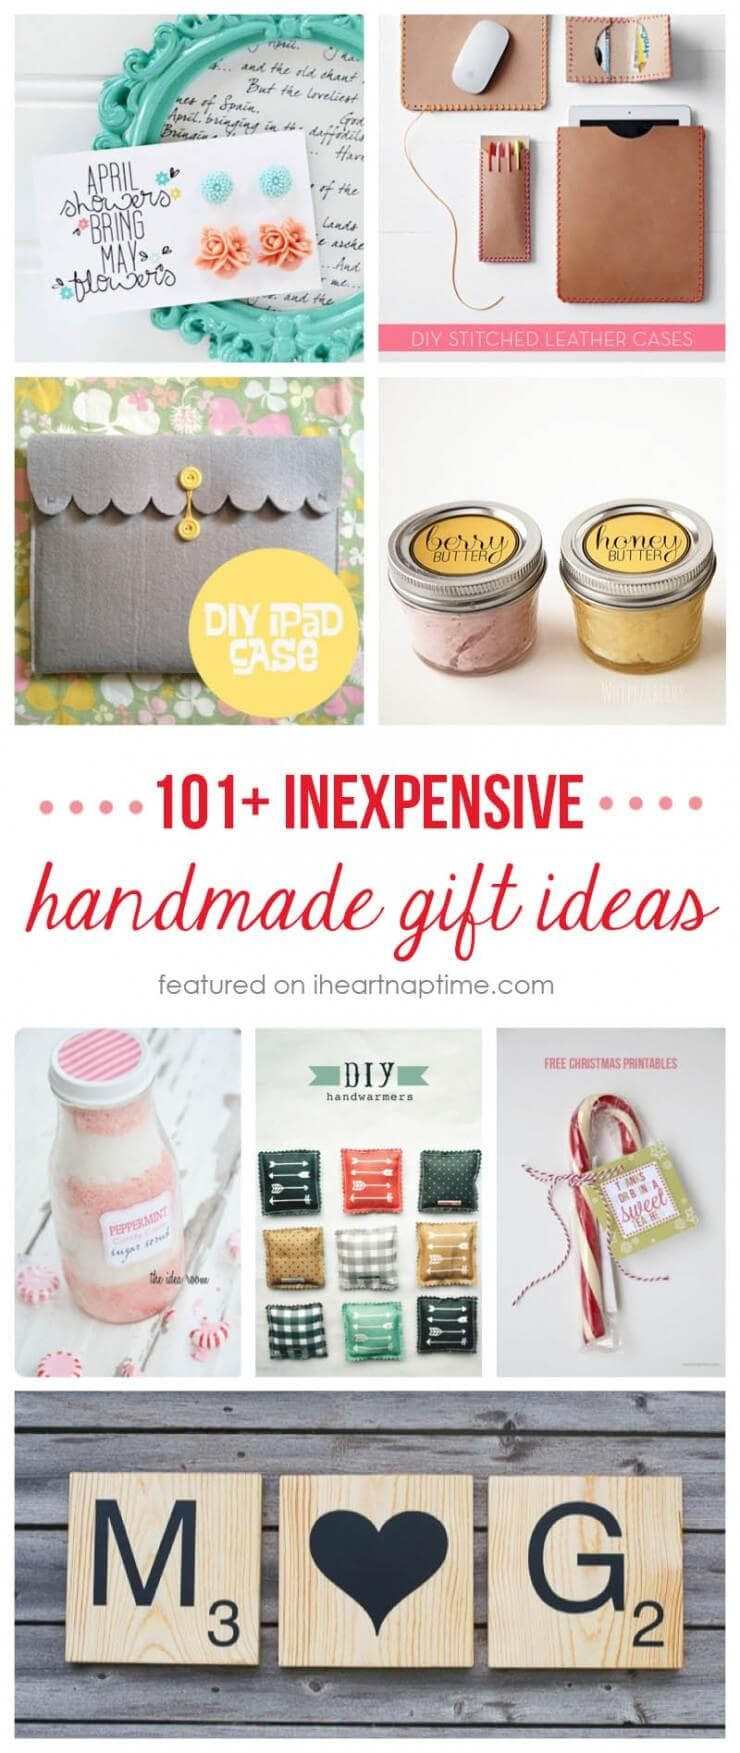 Good DIY Christmas Gifts
 50 homemade t ideas to make for under $5 I Heart Nap Time